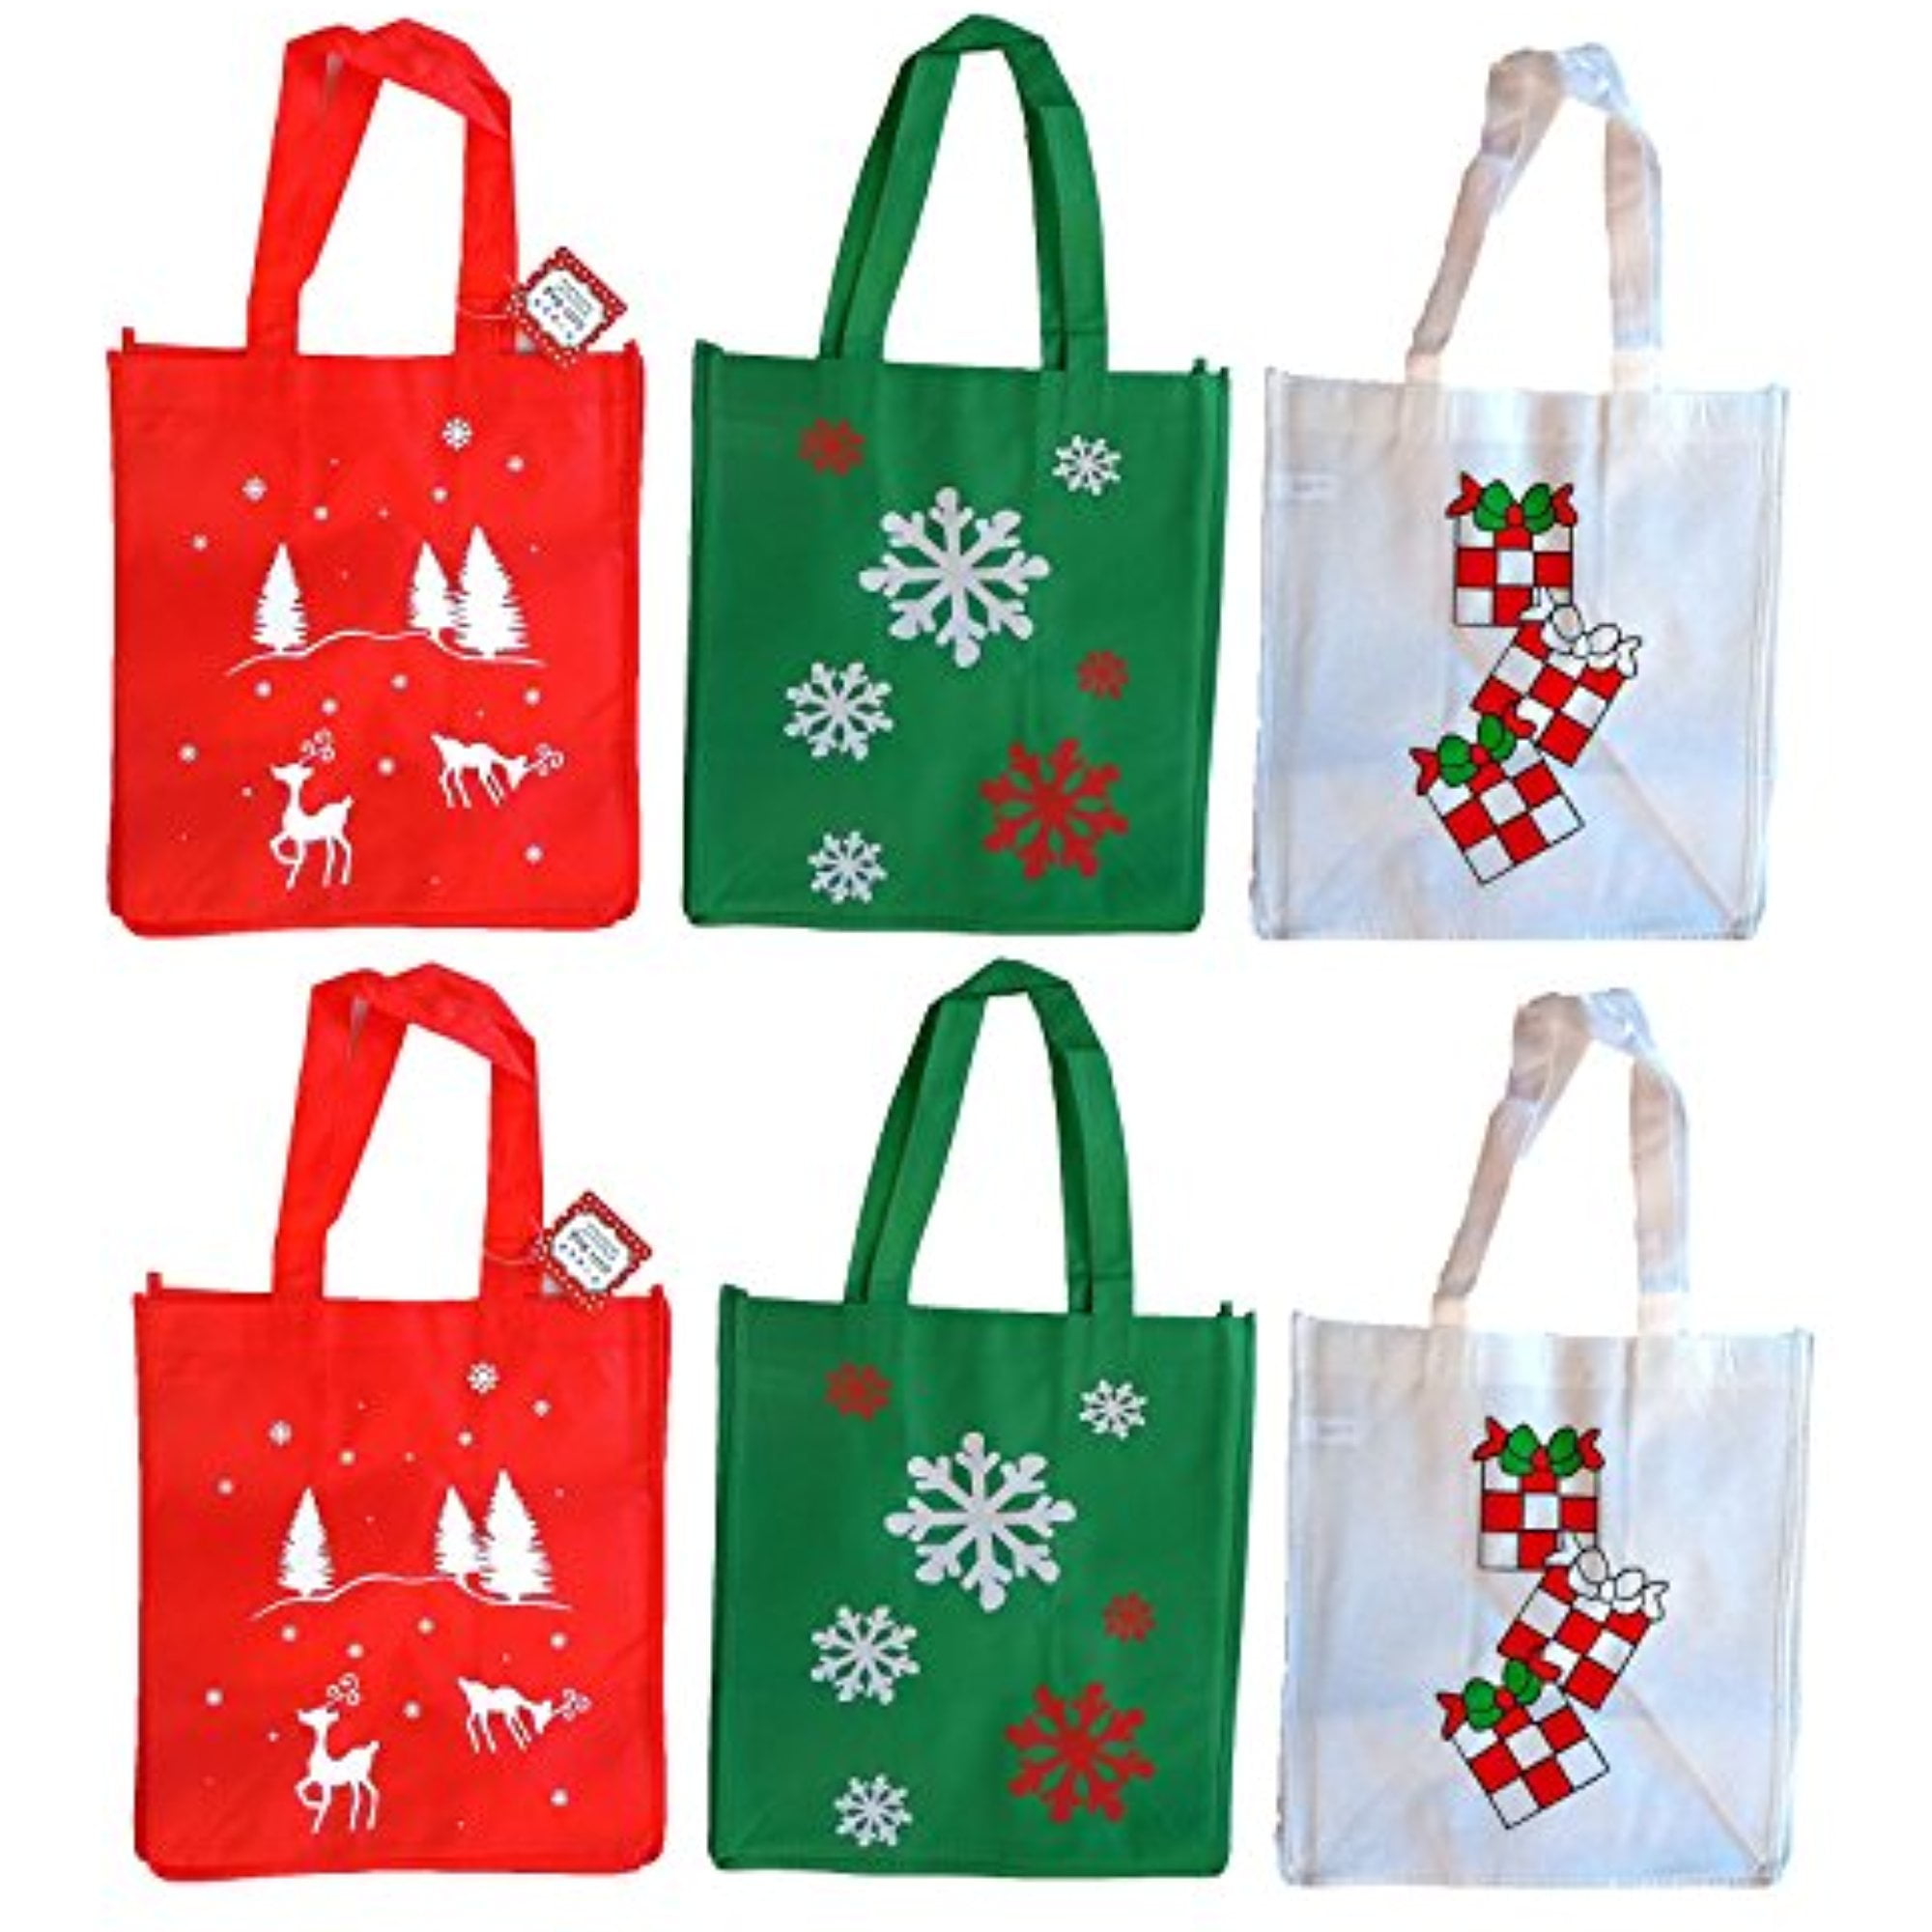 Christmas Cotton Bags Gift Bags Reusable Drawstring Bags Jewelry Pouch 6 Bags 